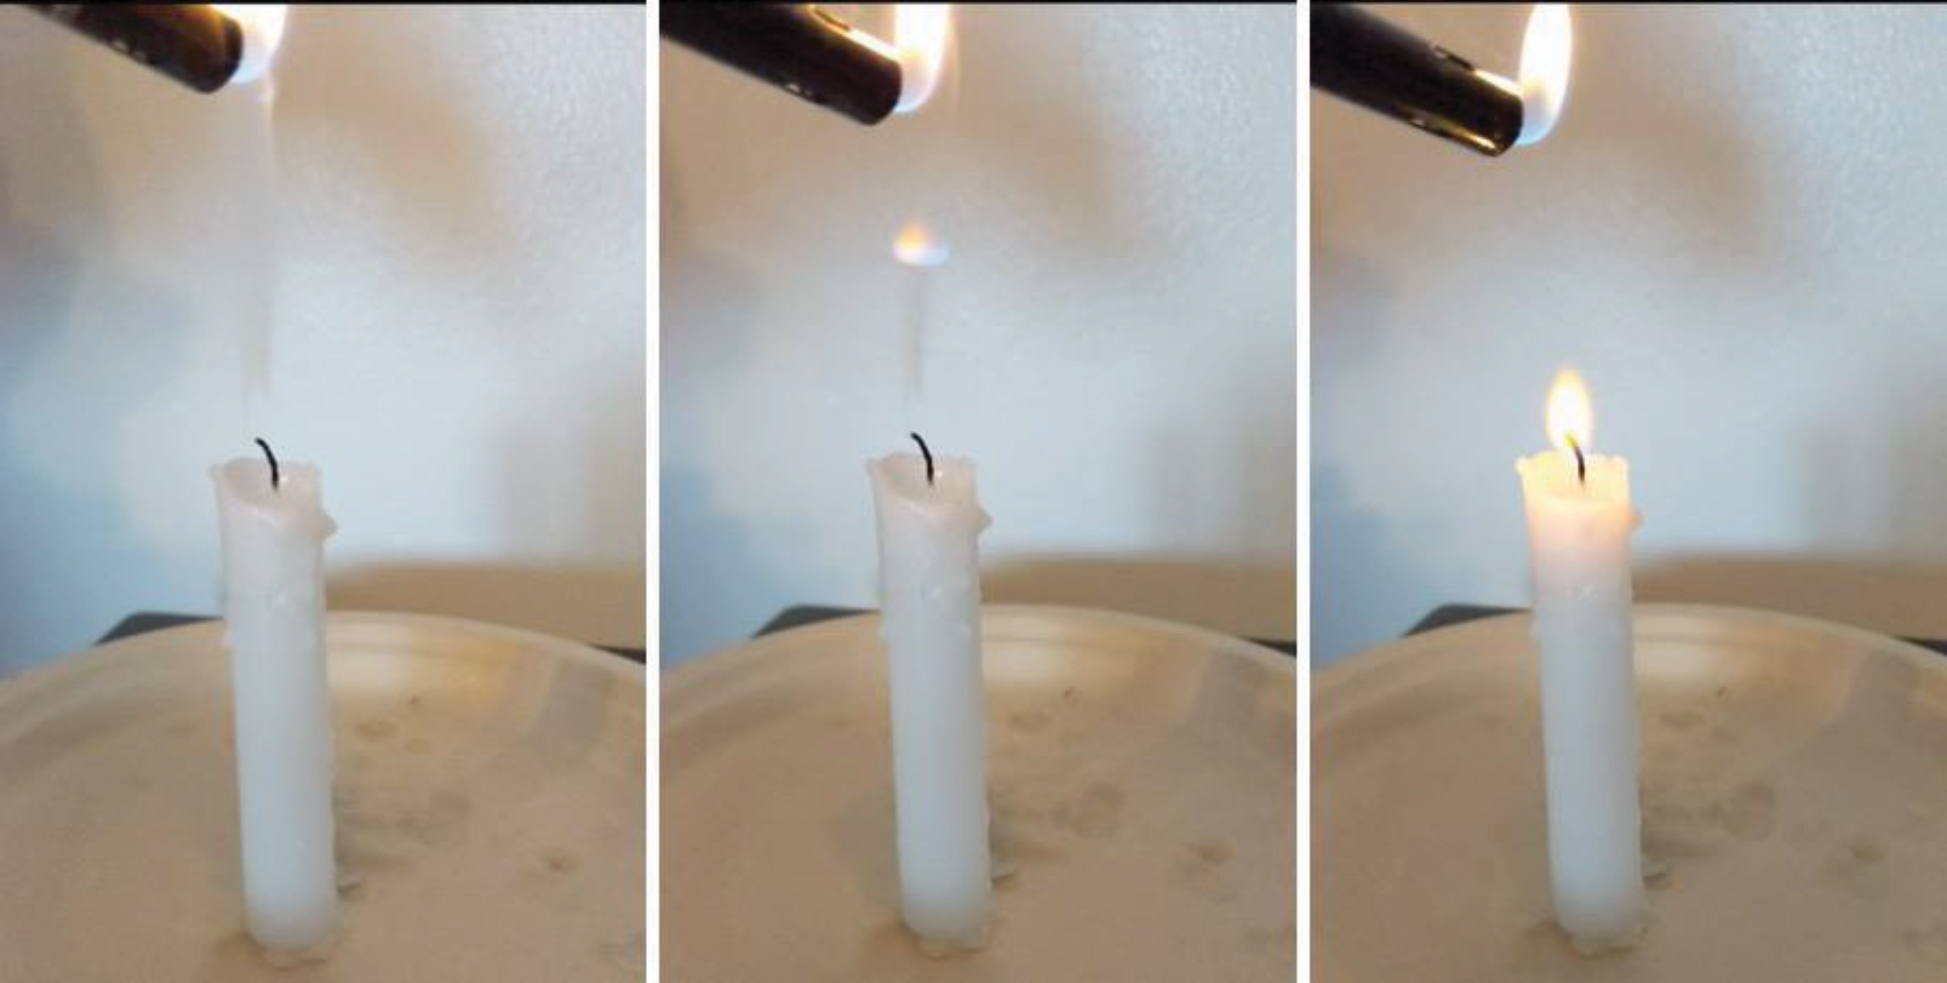 By placing a lighter flame into the plume of smoke (evaporated hydrocarbons) coming from a recently extinguished candle, a flame can be made to “jump” down the column of smoke and relight the candle (full video of this process is available in <a class